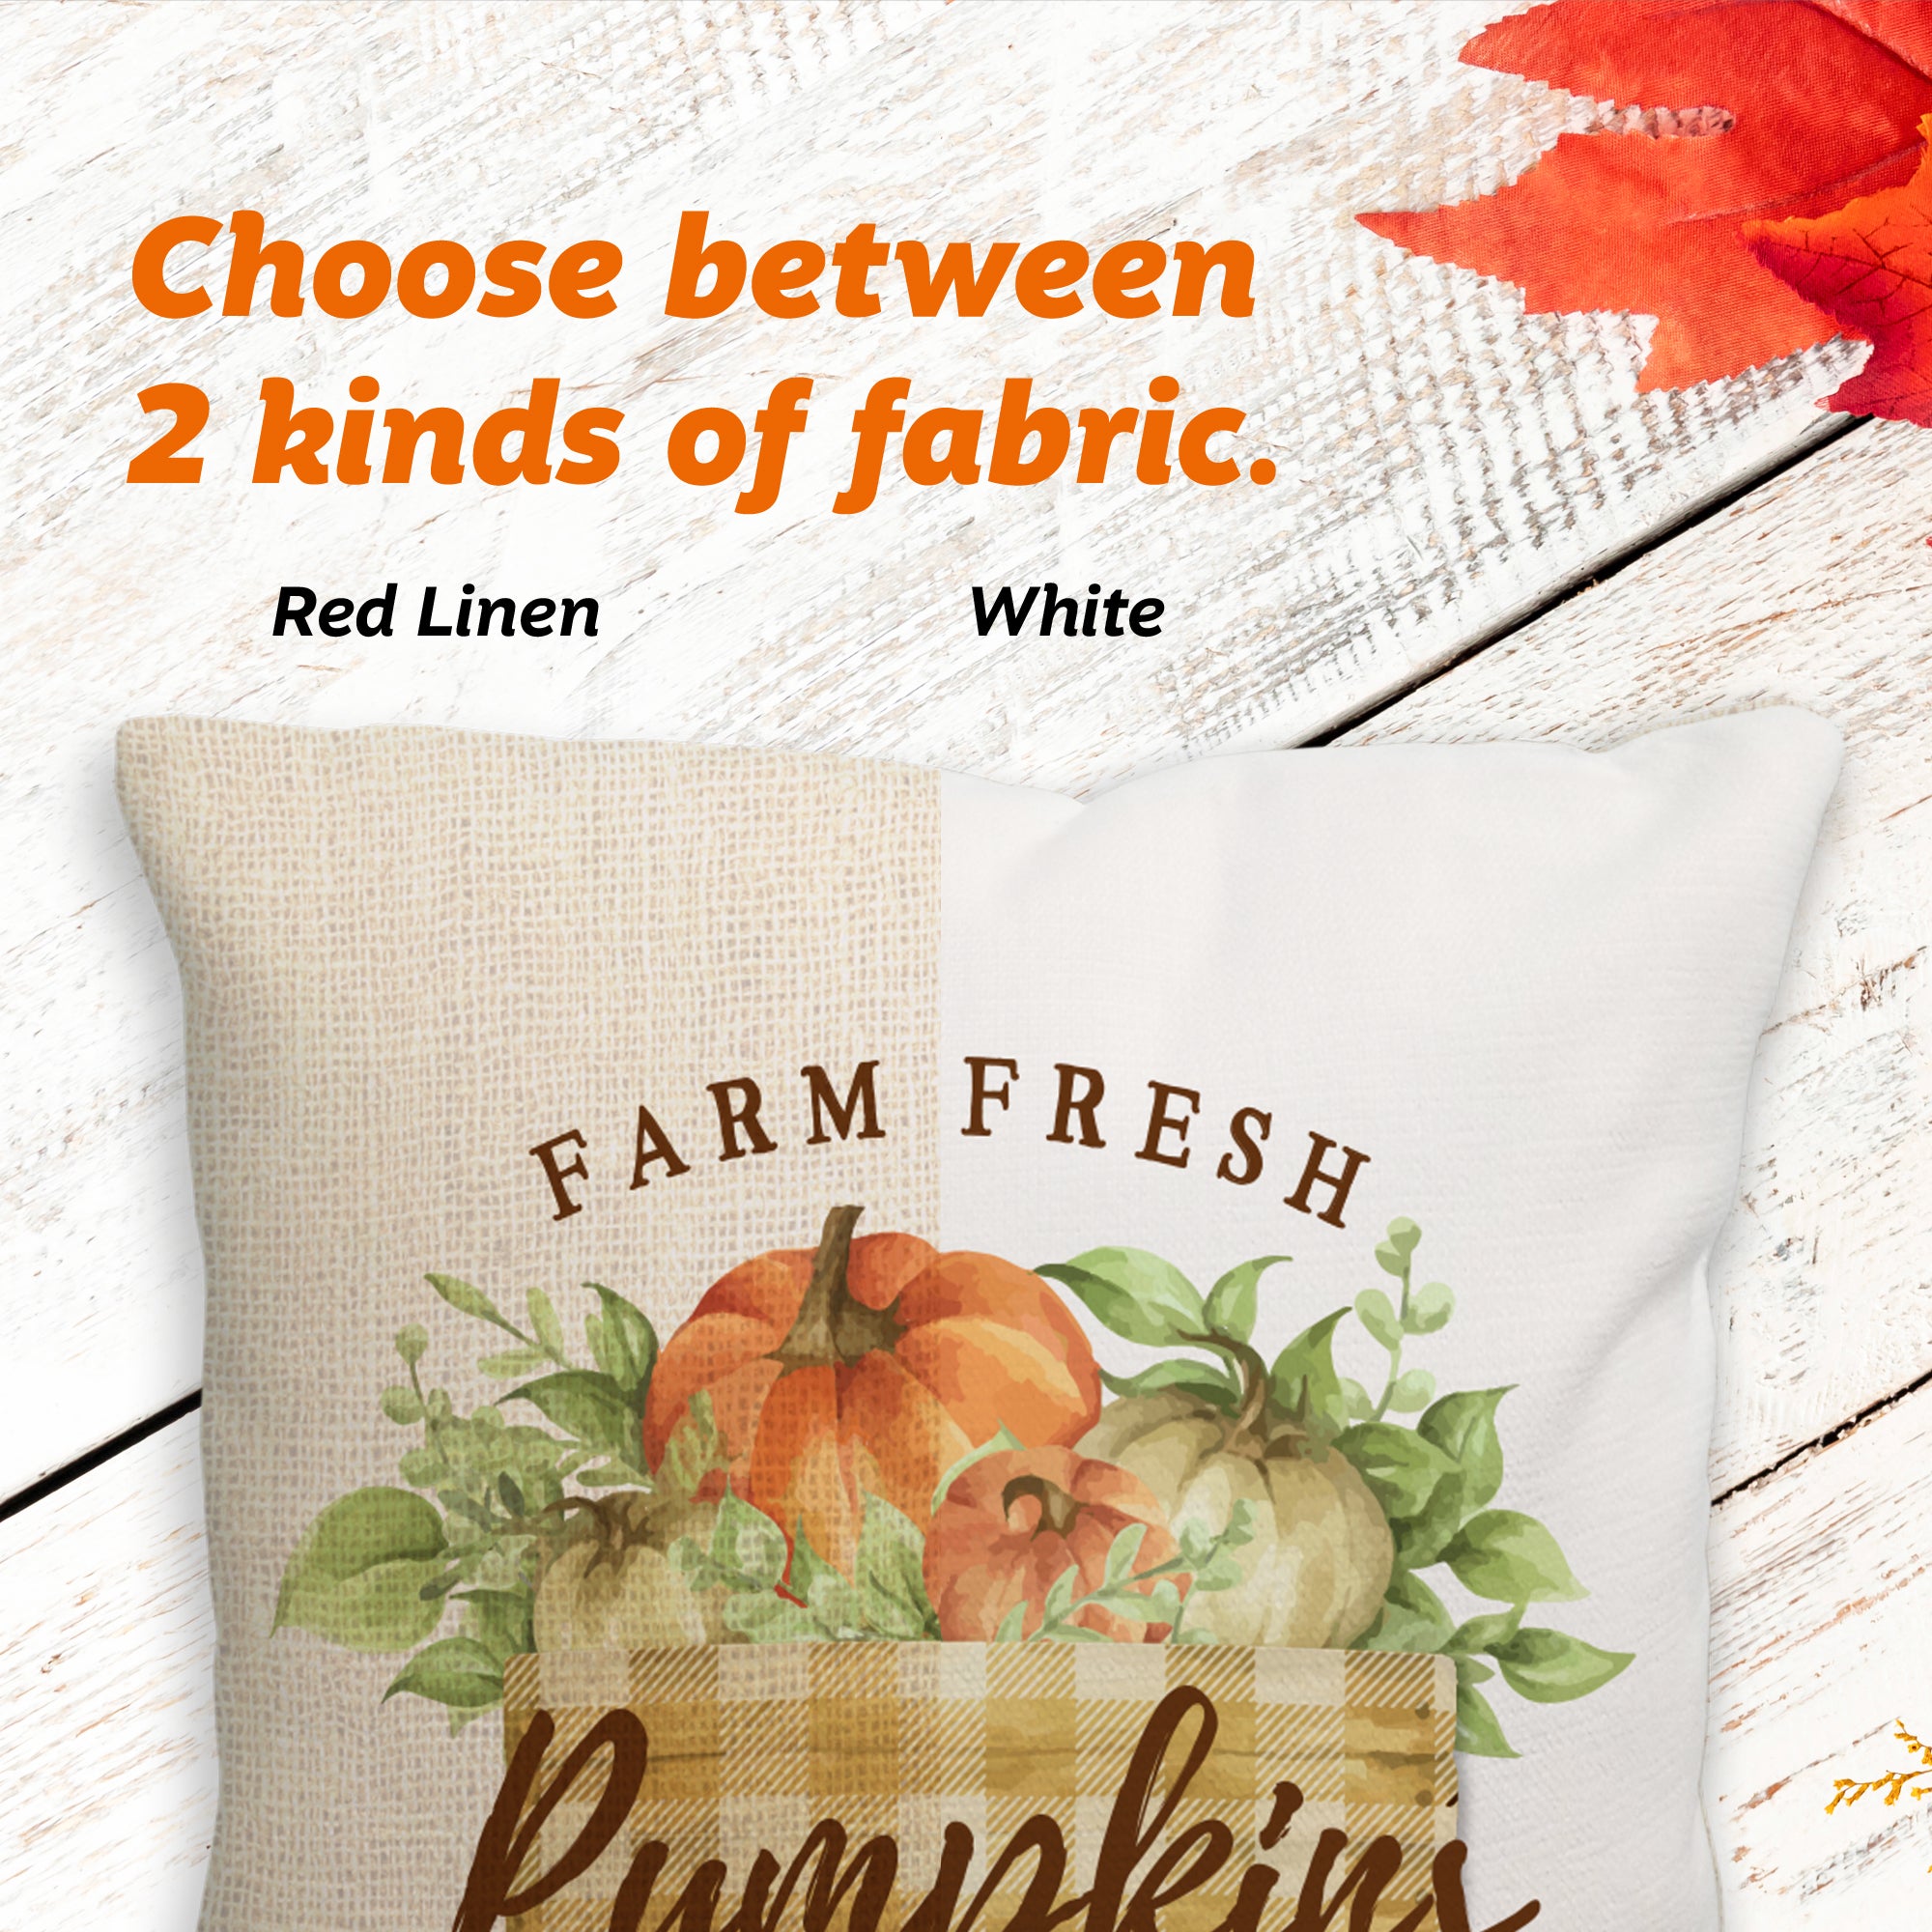 Autumn Harvest Personalized Pillow Covers - Set of 3